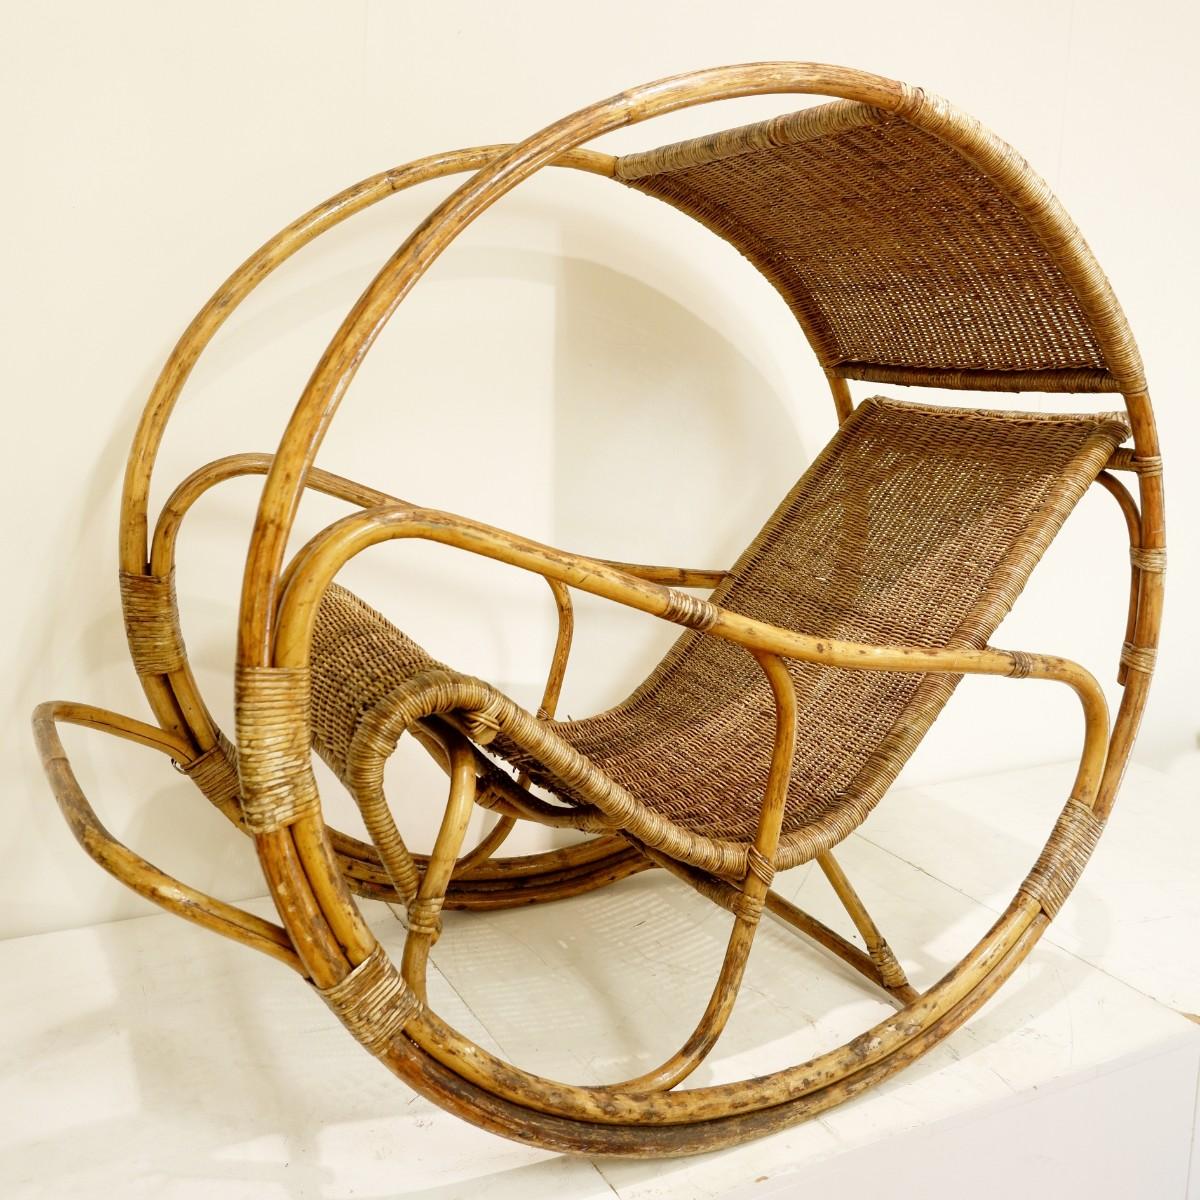 Rattan and wicker circle rocking chair, 1960s.